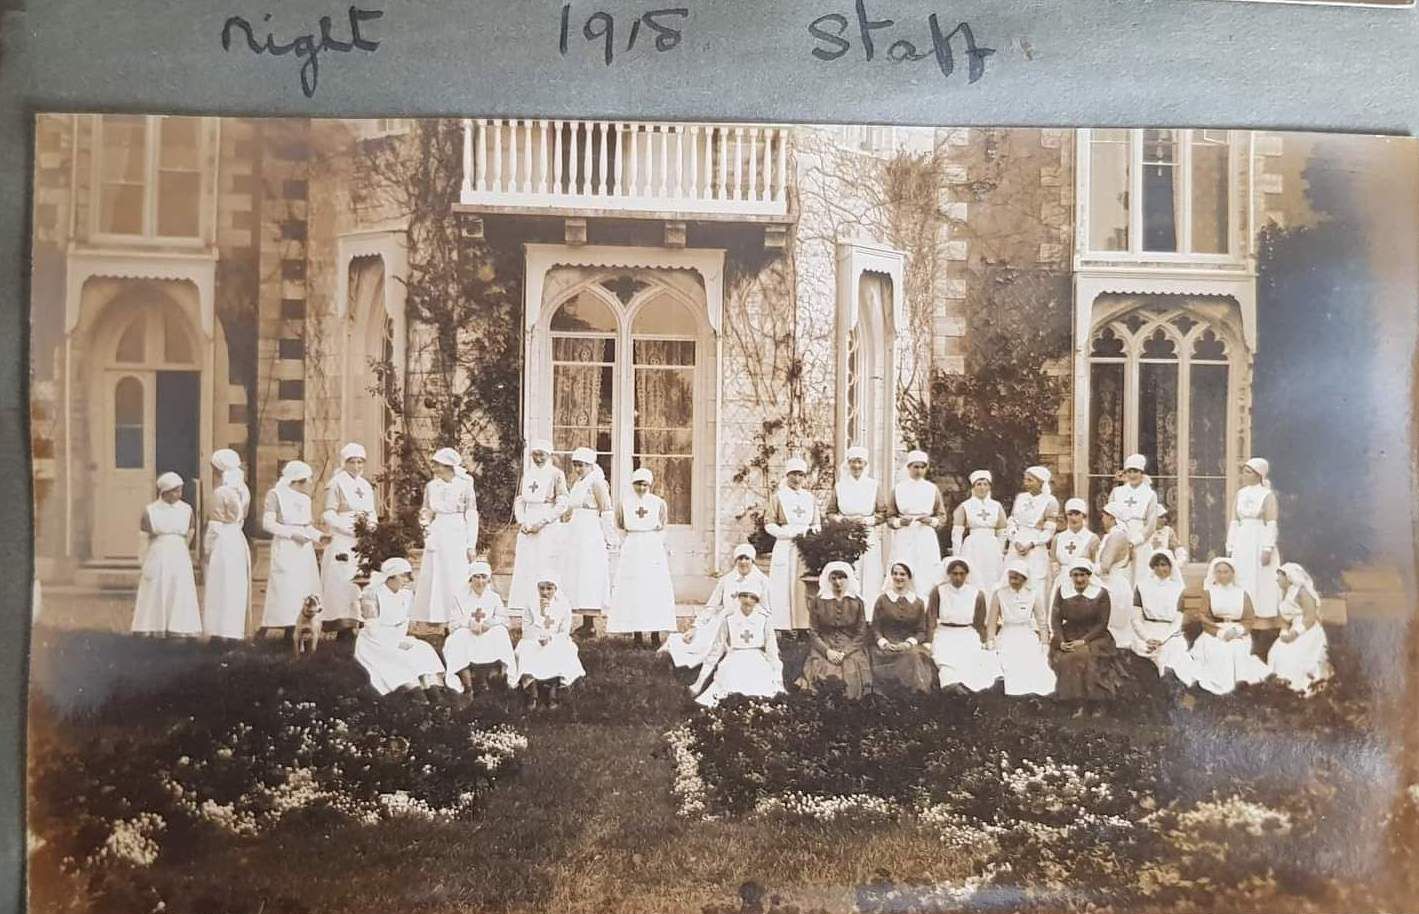 RVH Night Staff at Hamble Cliff House in 1918